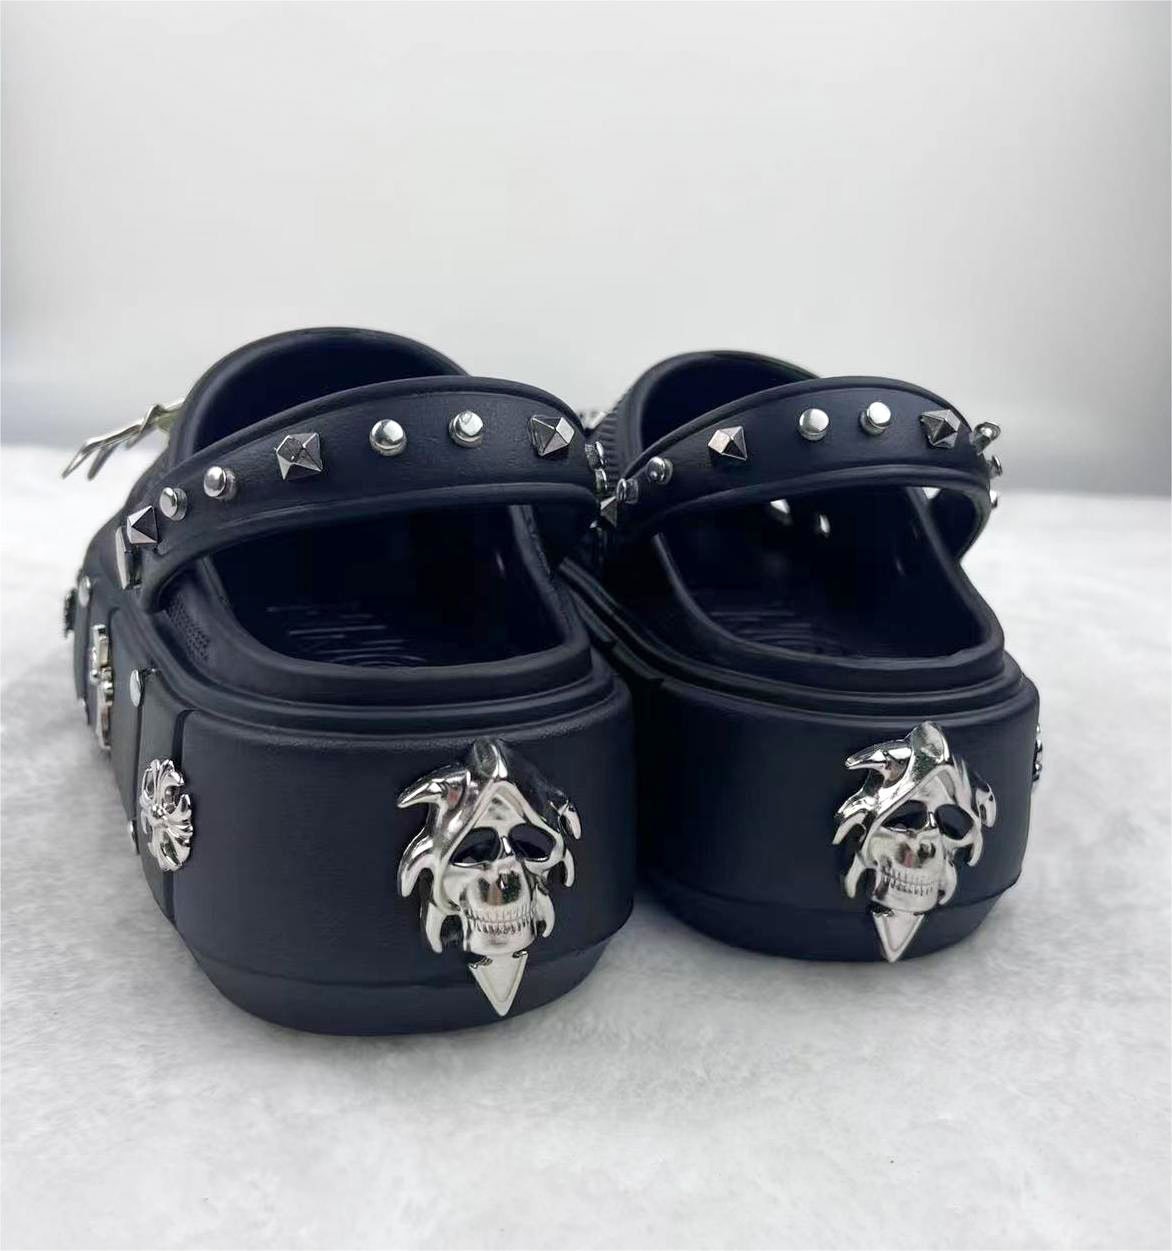 You Can Now Buy 'Goth Crocs' With Spikes And Chains - LADbible